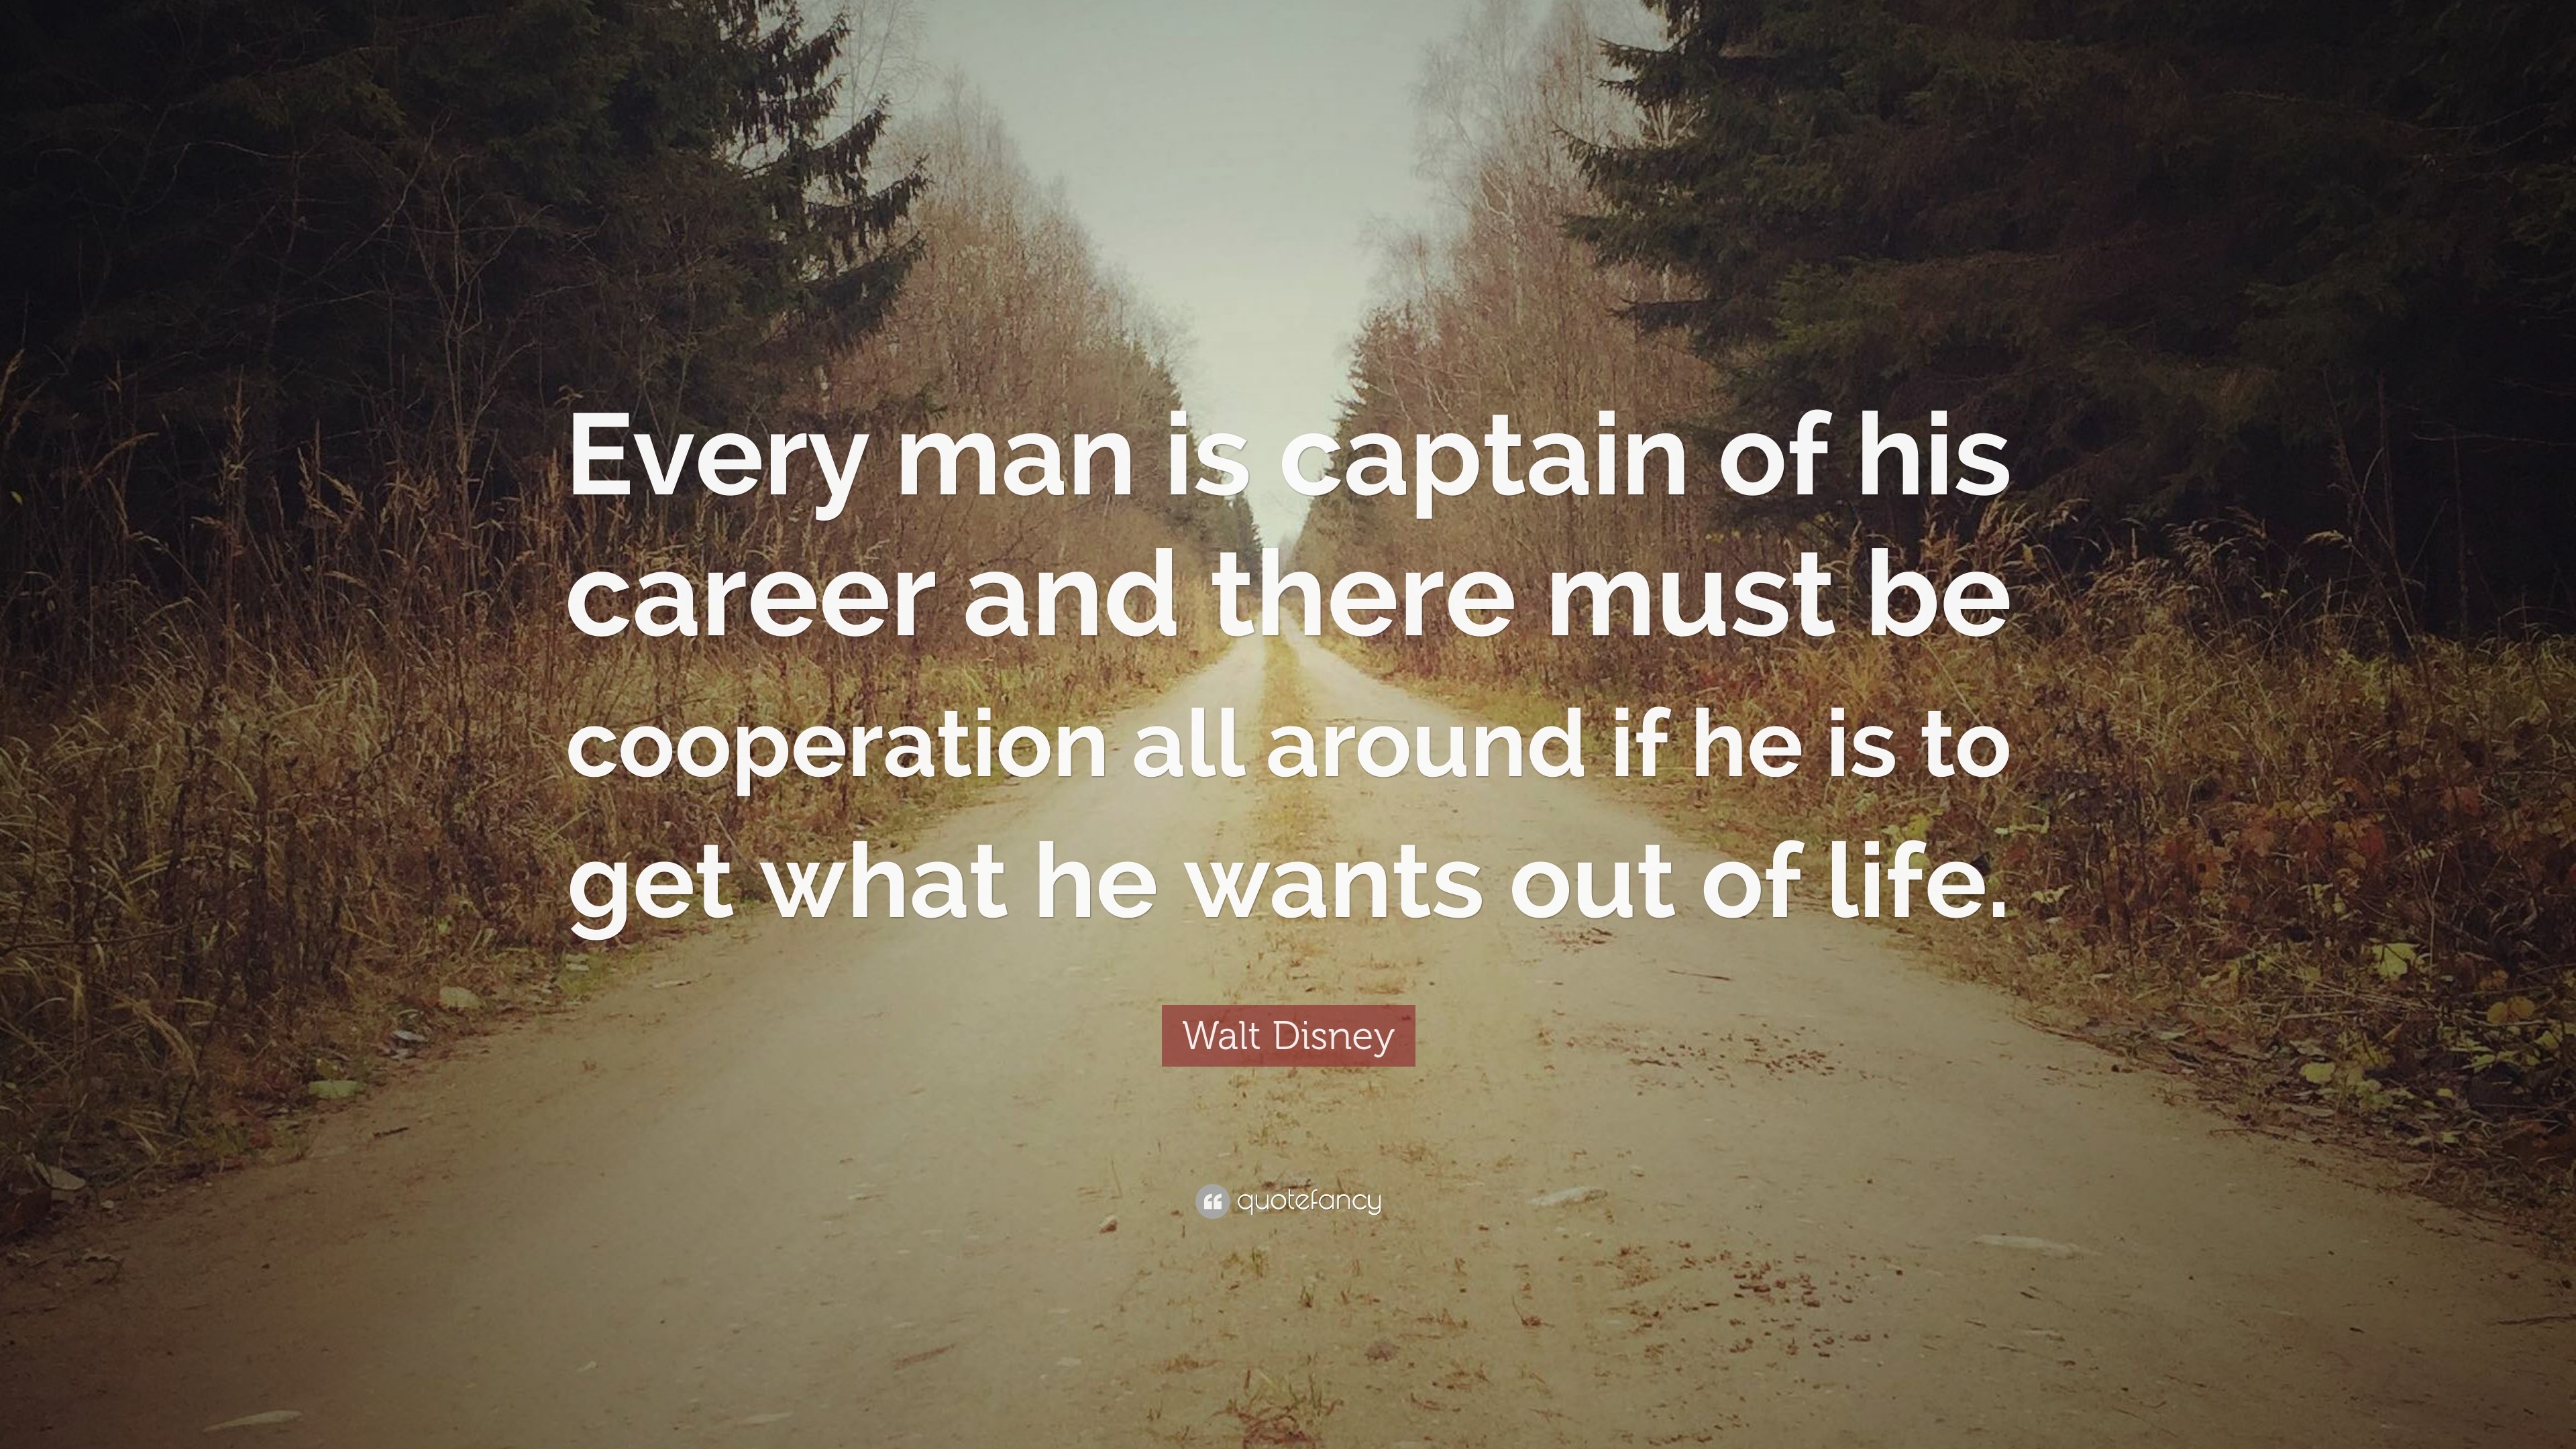 3840x2160 Walt Disney Quote: “Every man is captain of his career and there must be